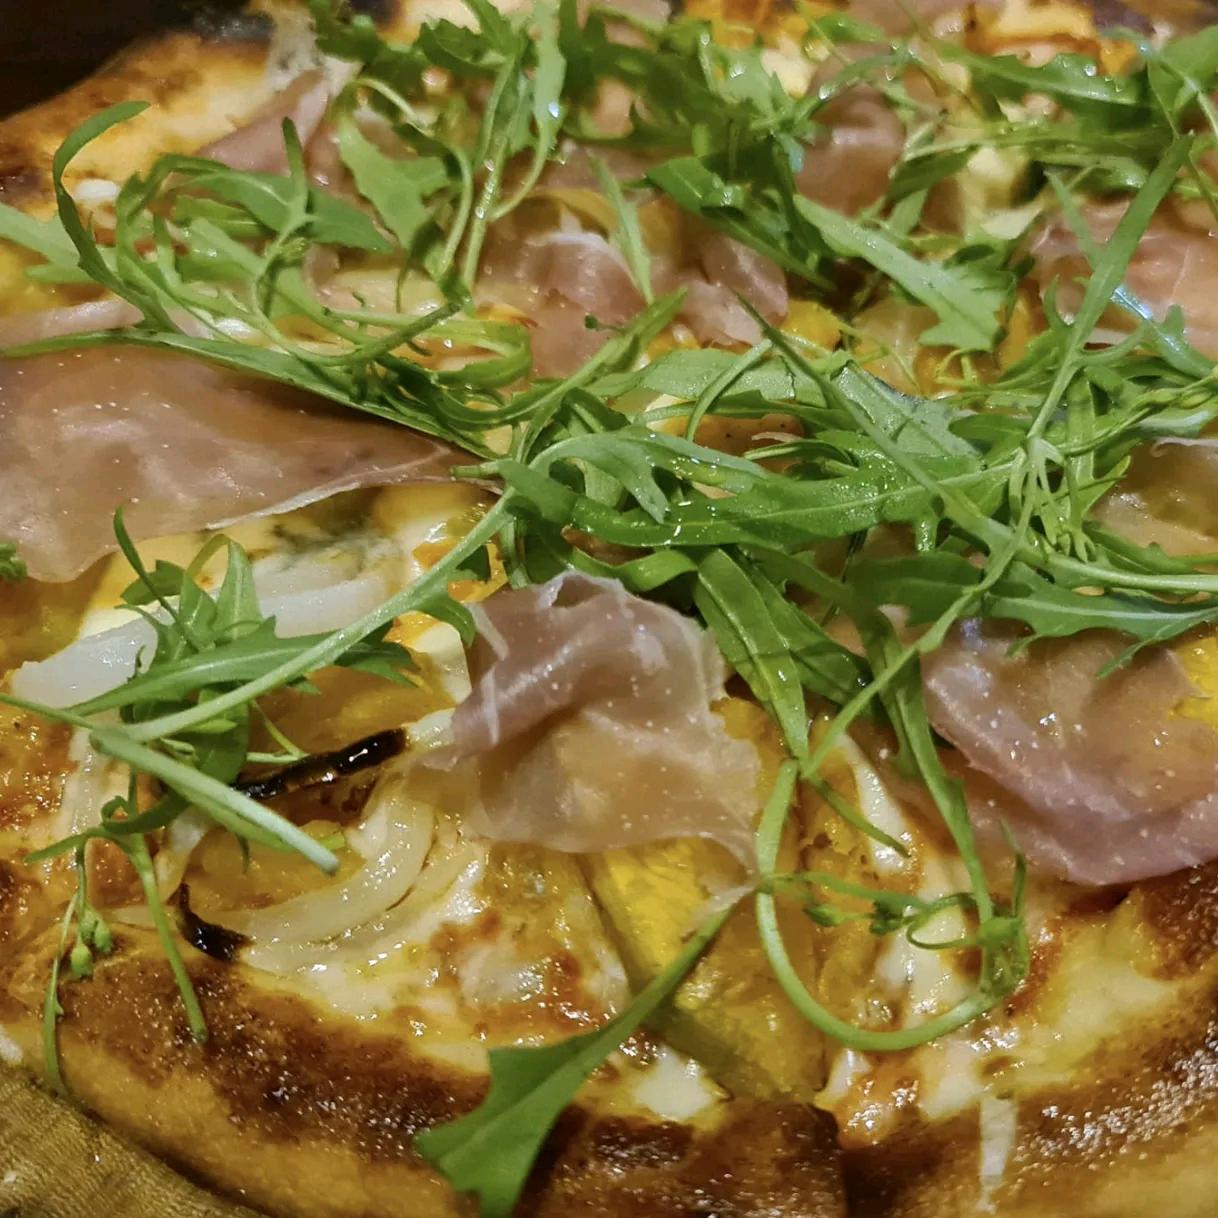 We've got you at Brick & Barrel in #nearby #saigon #vietnam district 1. #newyork style #pizza plus restaurant style #american size #hamburger with #frechfries